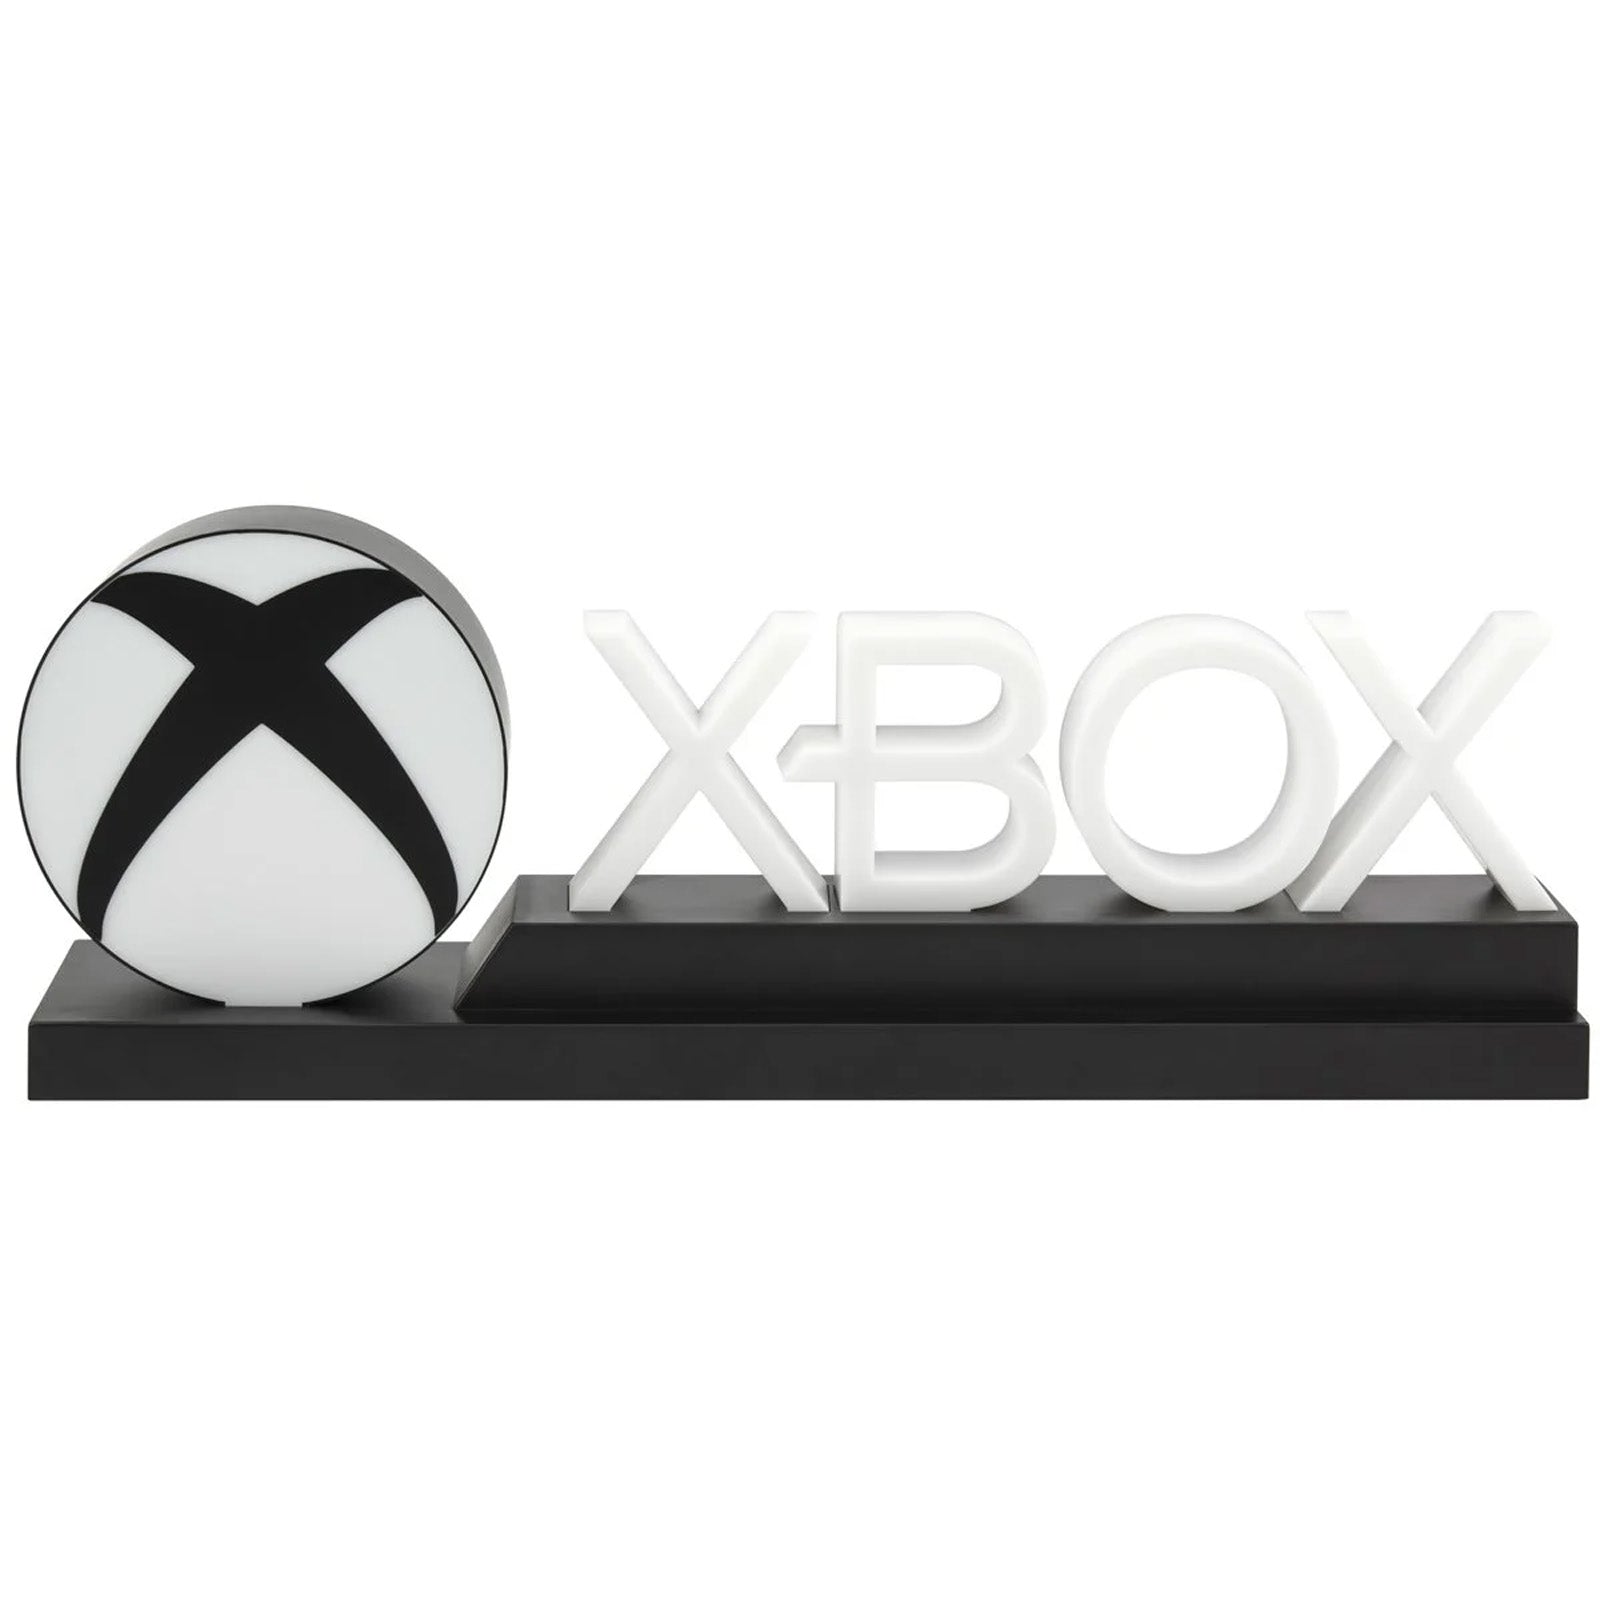 1800 for my xbox